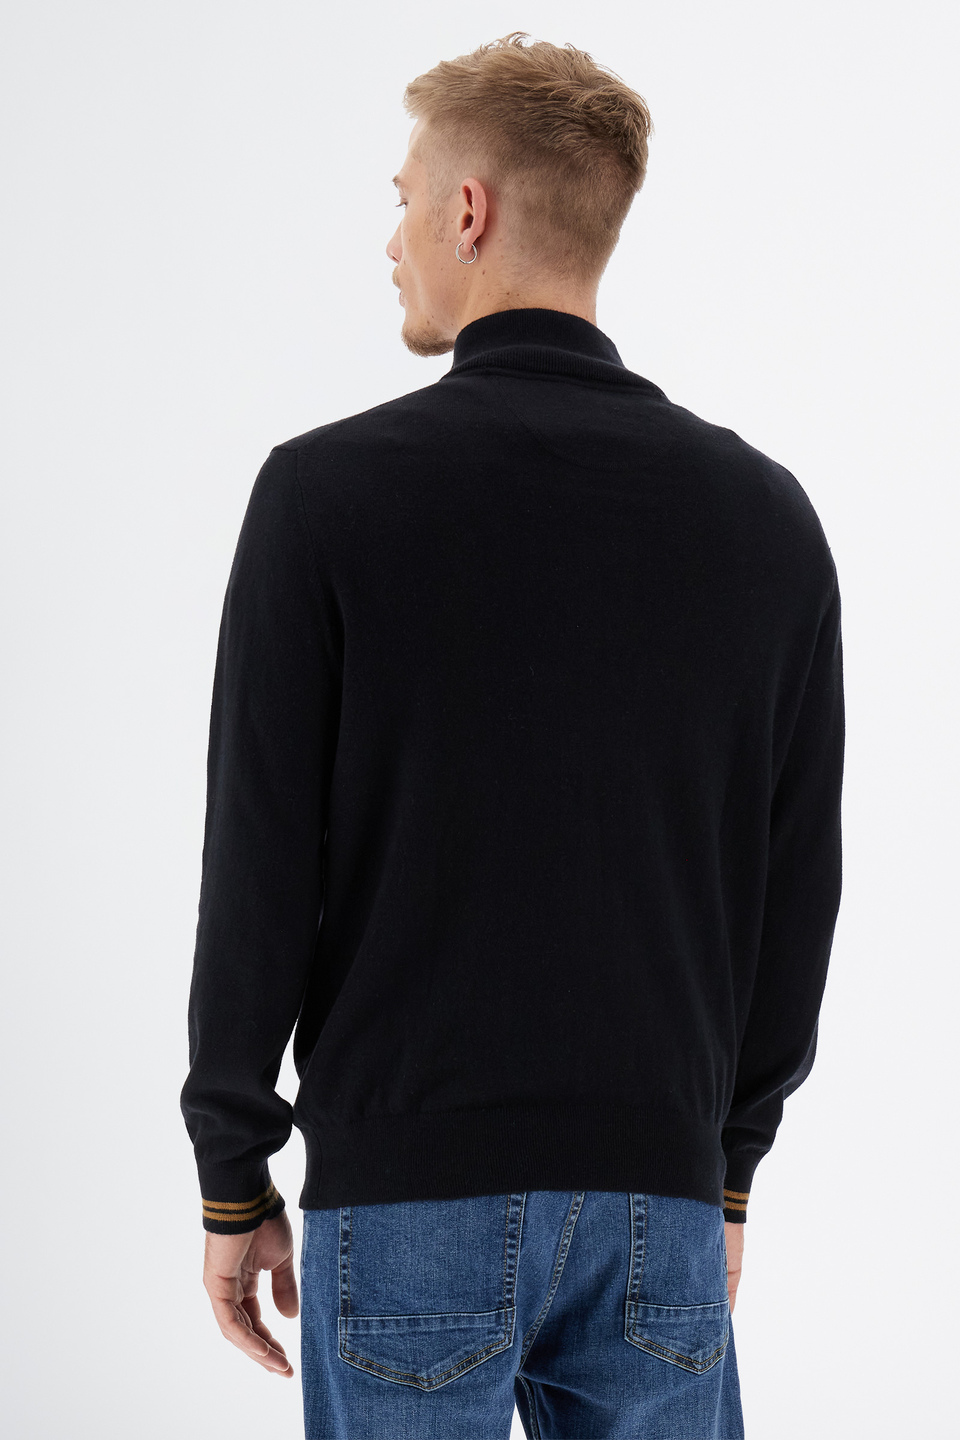 Men’s knitted sweater with long sleeves in cotton blend wool regular fit zip neckline | La Martina - Official Online Shop